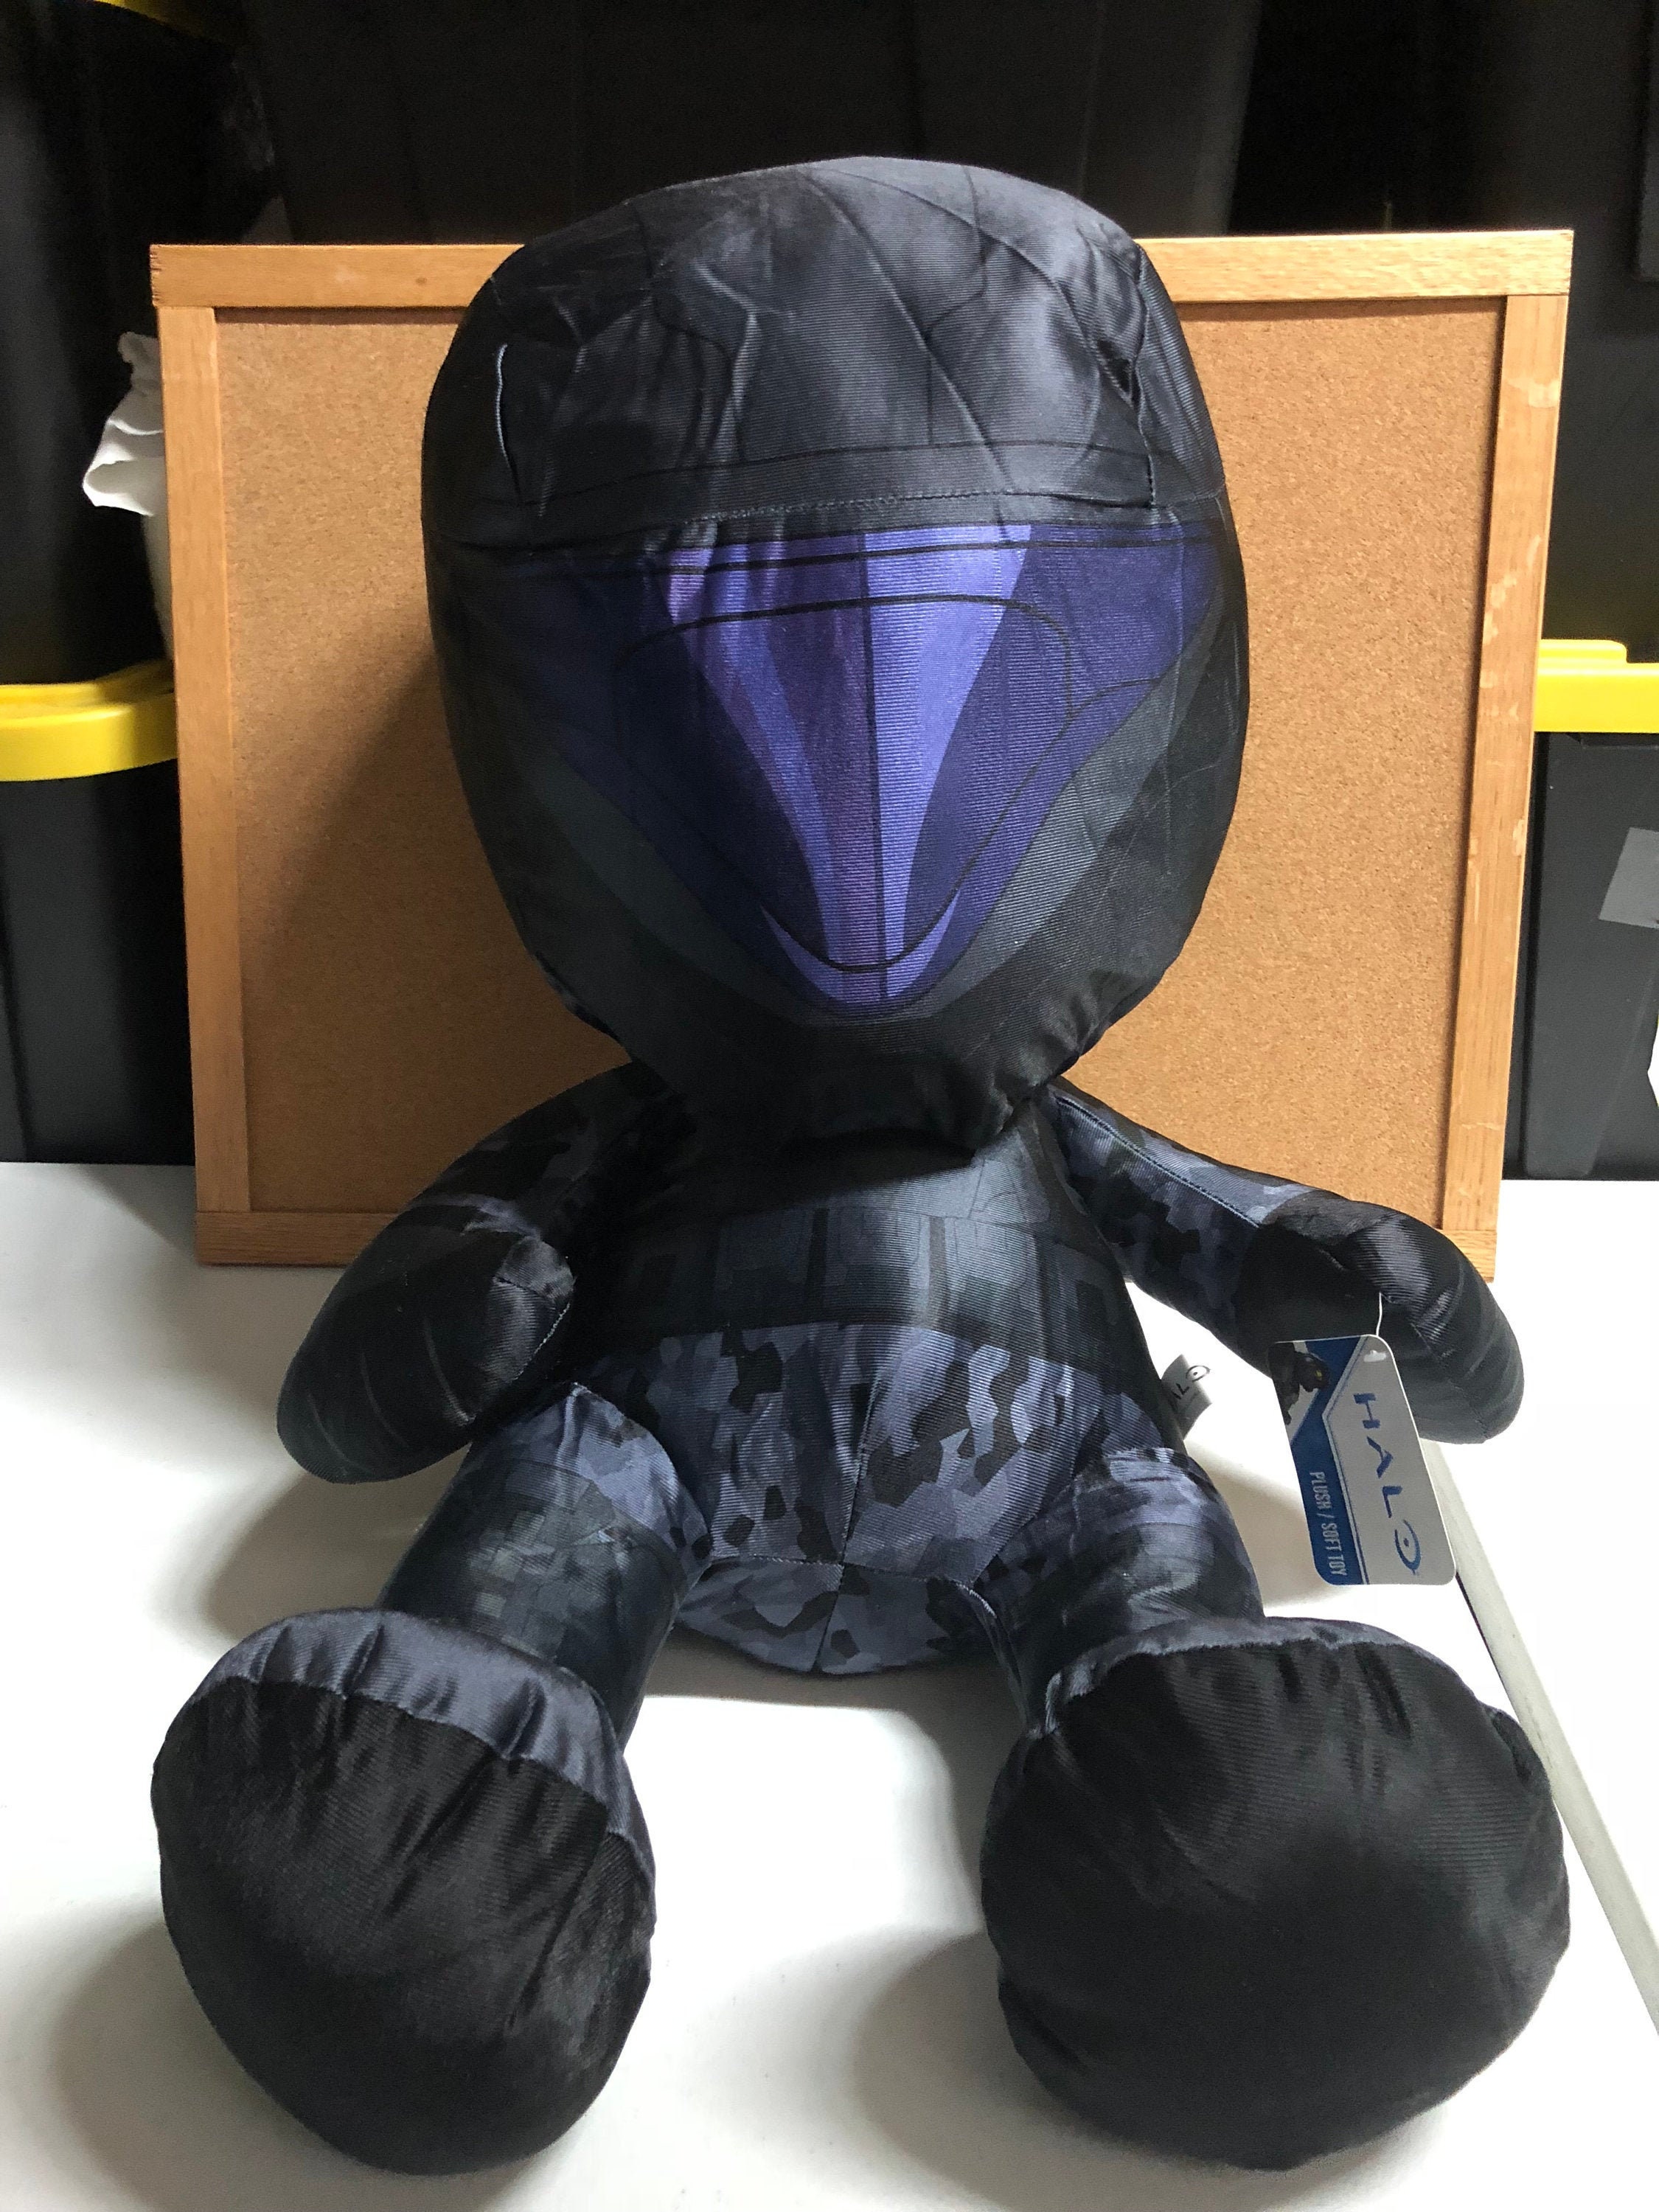 NWT 8” Bandai Namco Halo ODST Plush Doll by Toy Factory